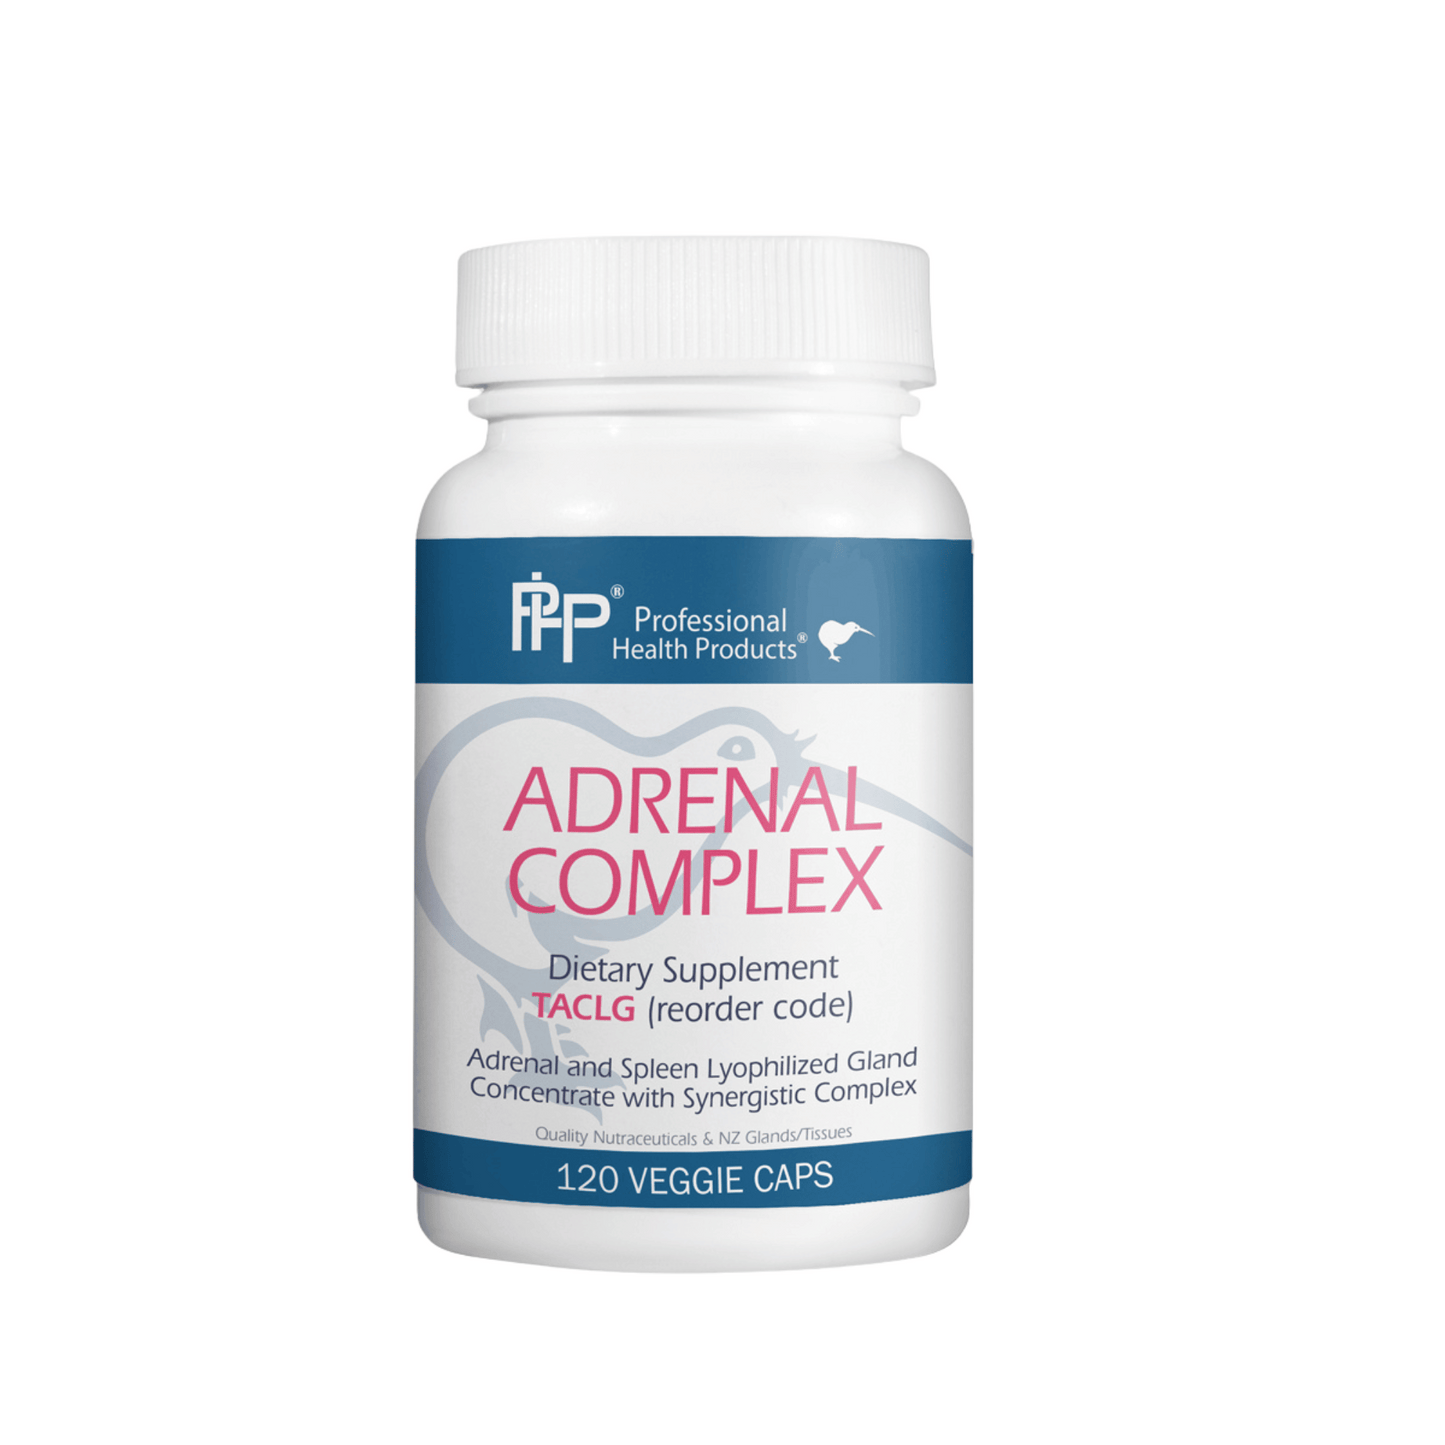 Primary Image of Adrenal Complex